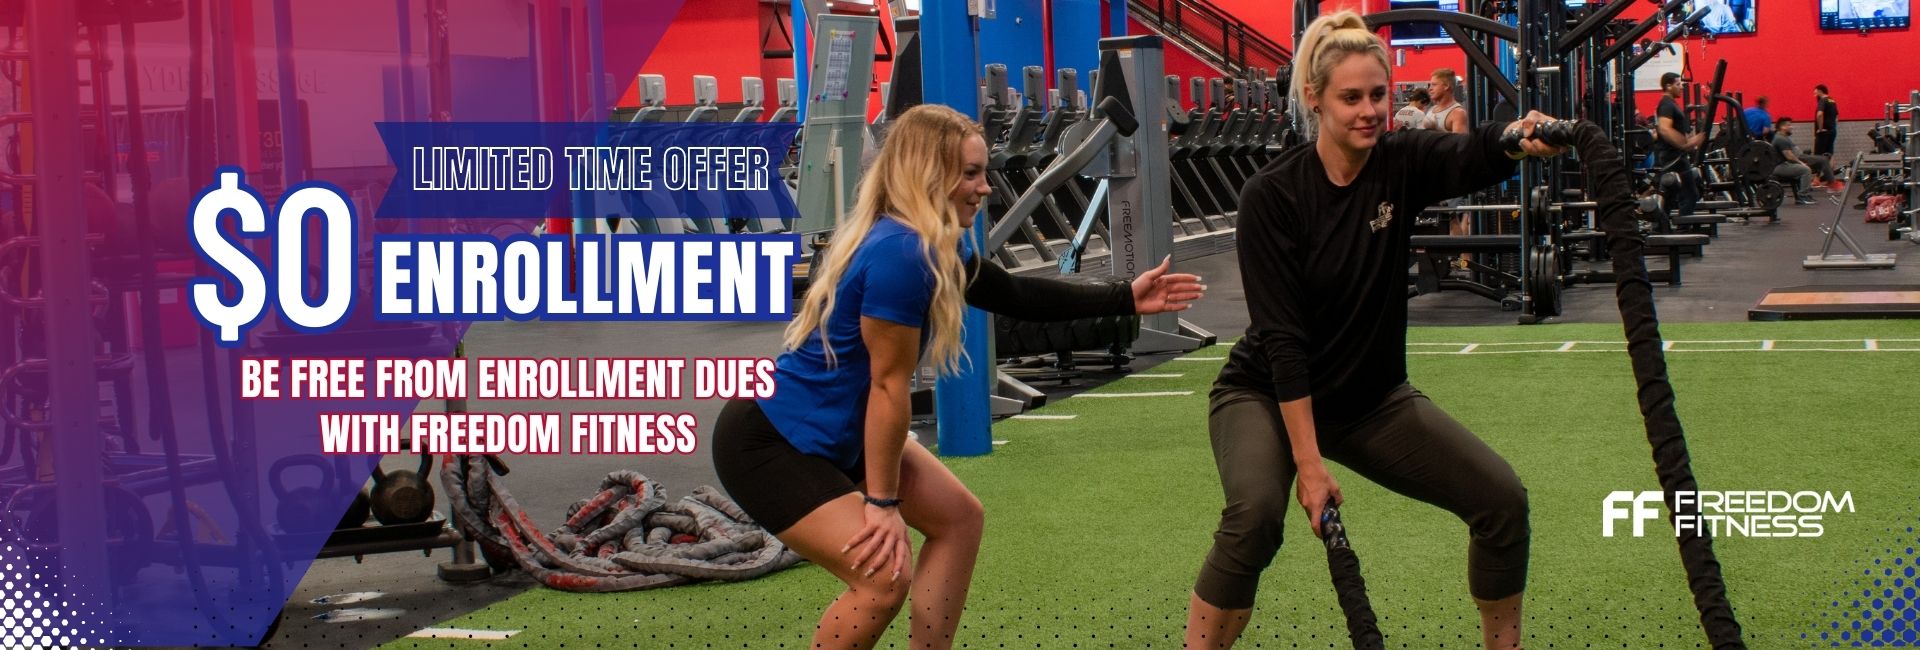 Corpus Christi certified private trainer helping a gym member with a battle ropes exercise at a Freedom Fitness gym near me in SPID with a $0 Enrollment Membership sale